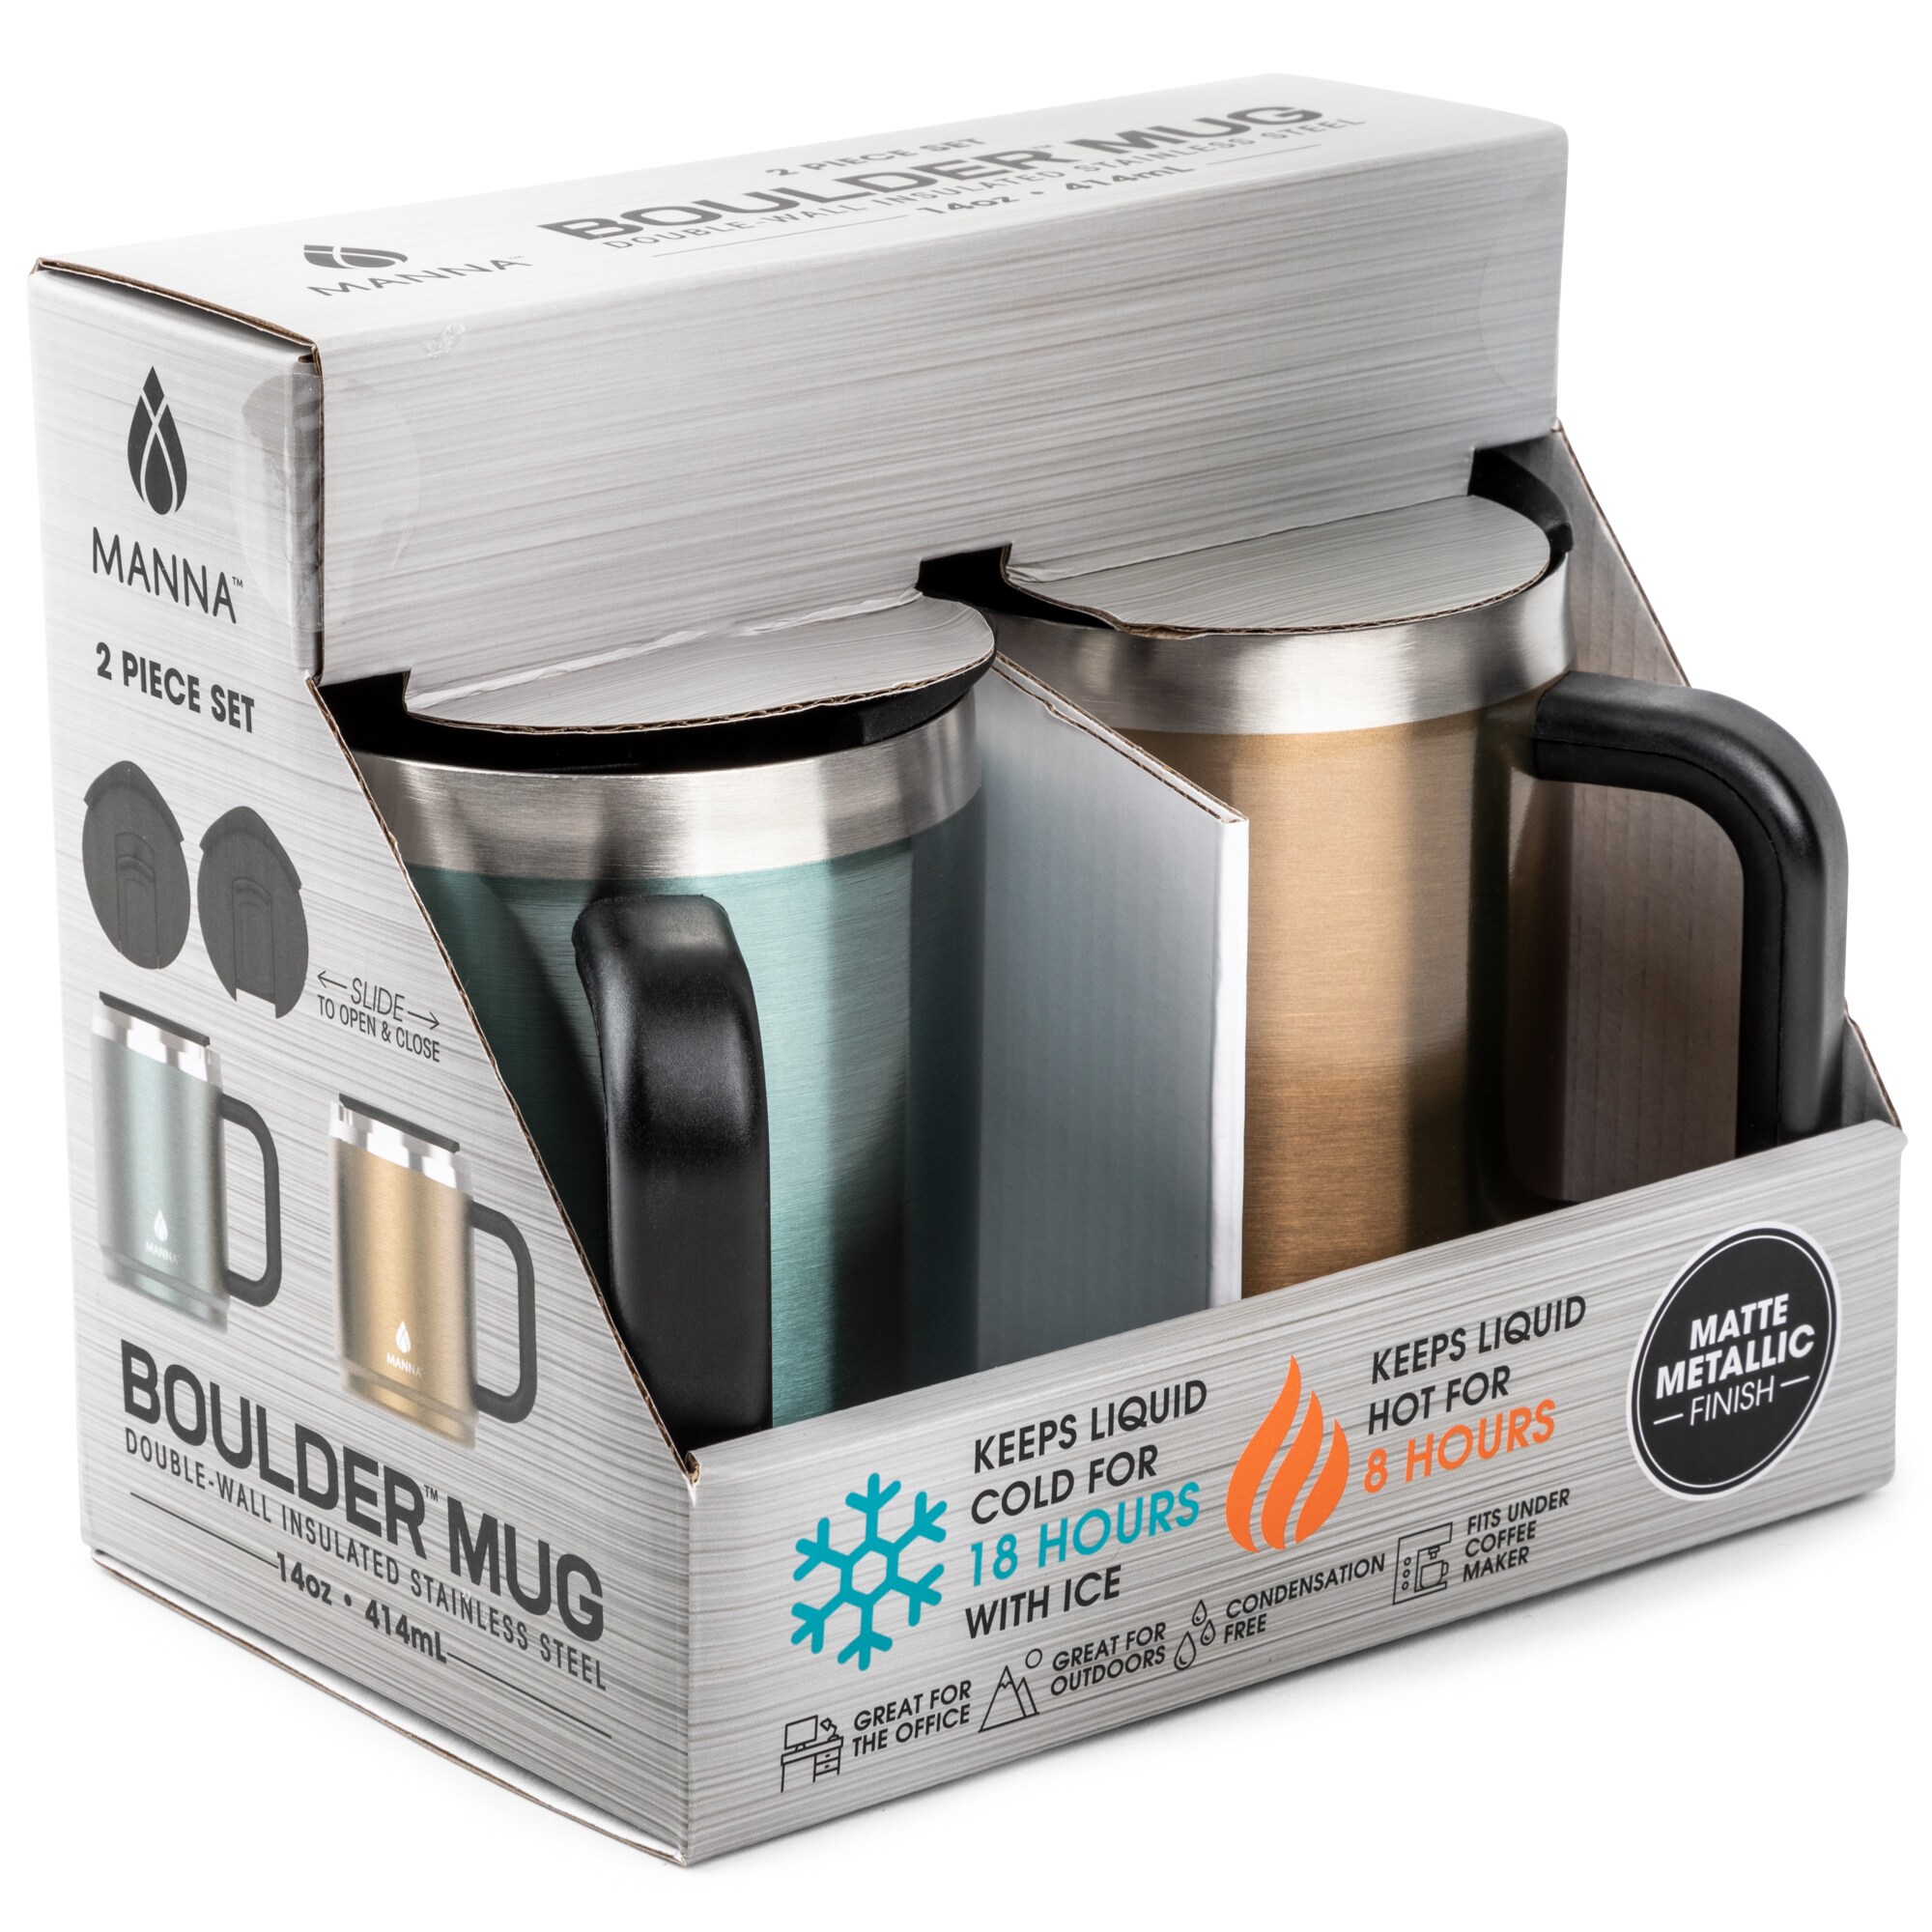 Manna 14-fl oz Stainless Steel Insulated Travel Mug (2-Pack) at